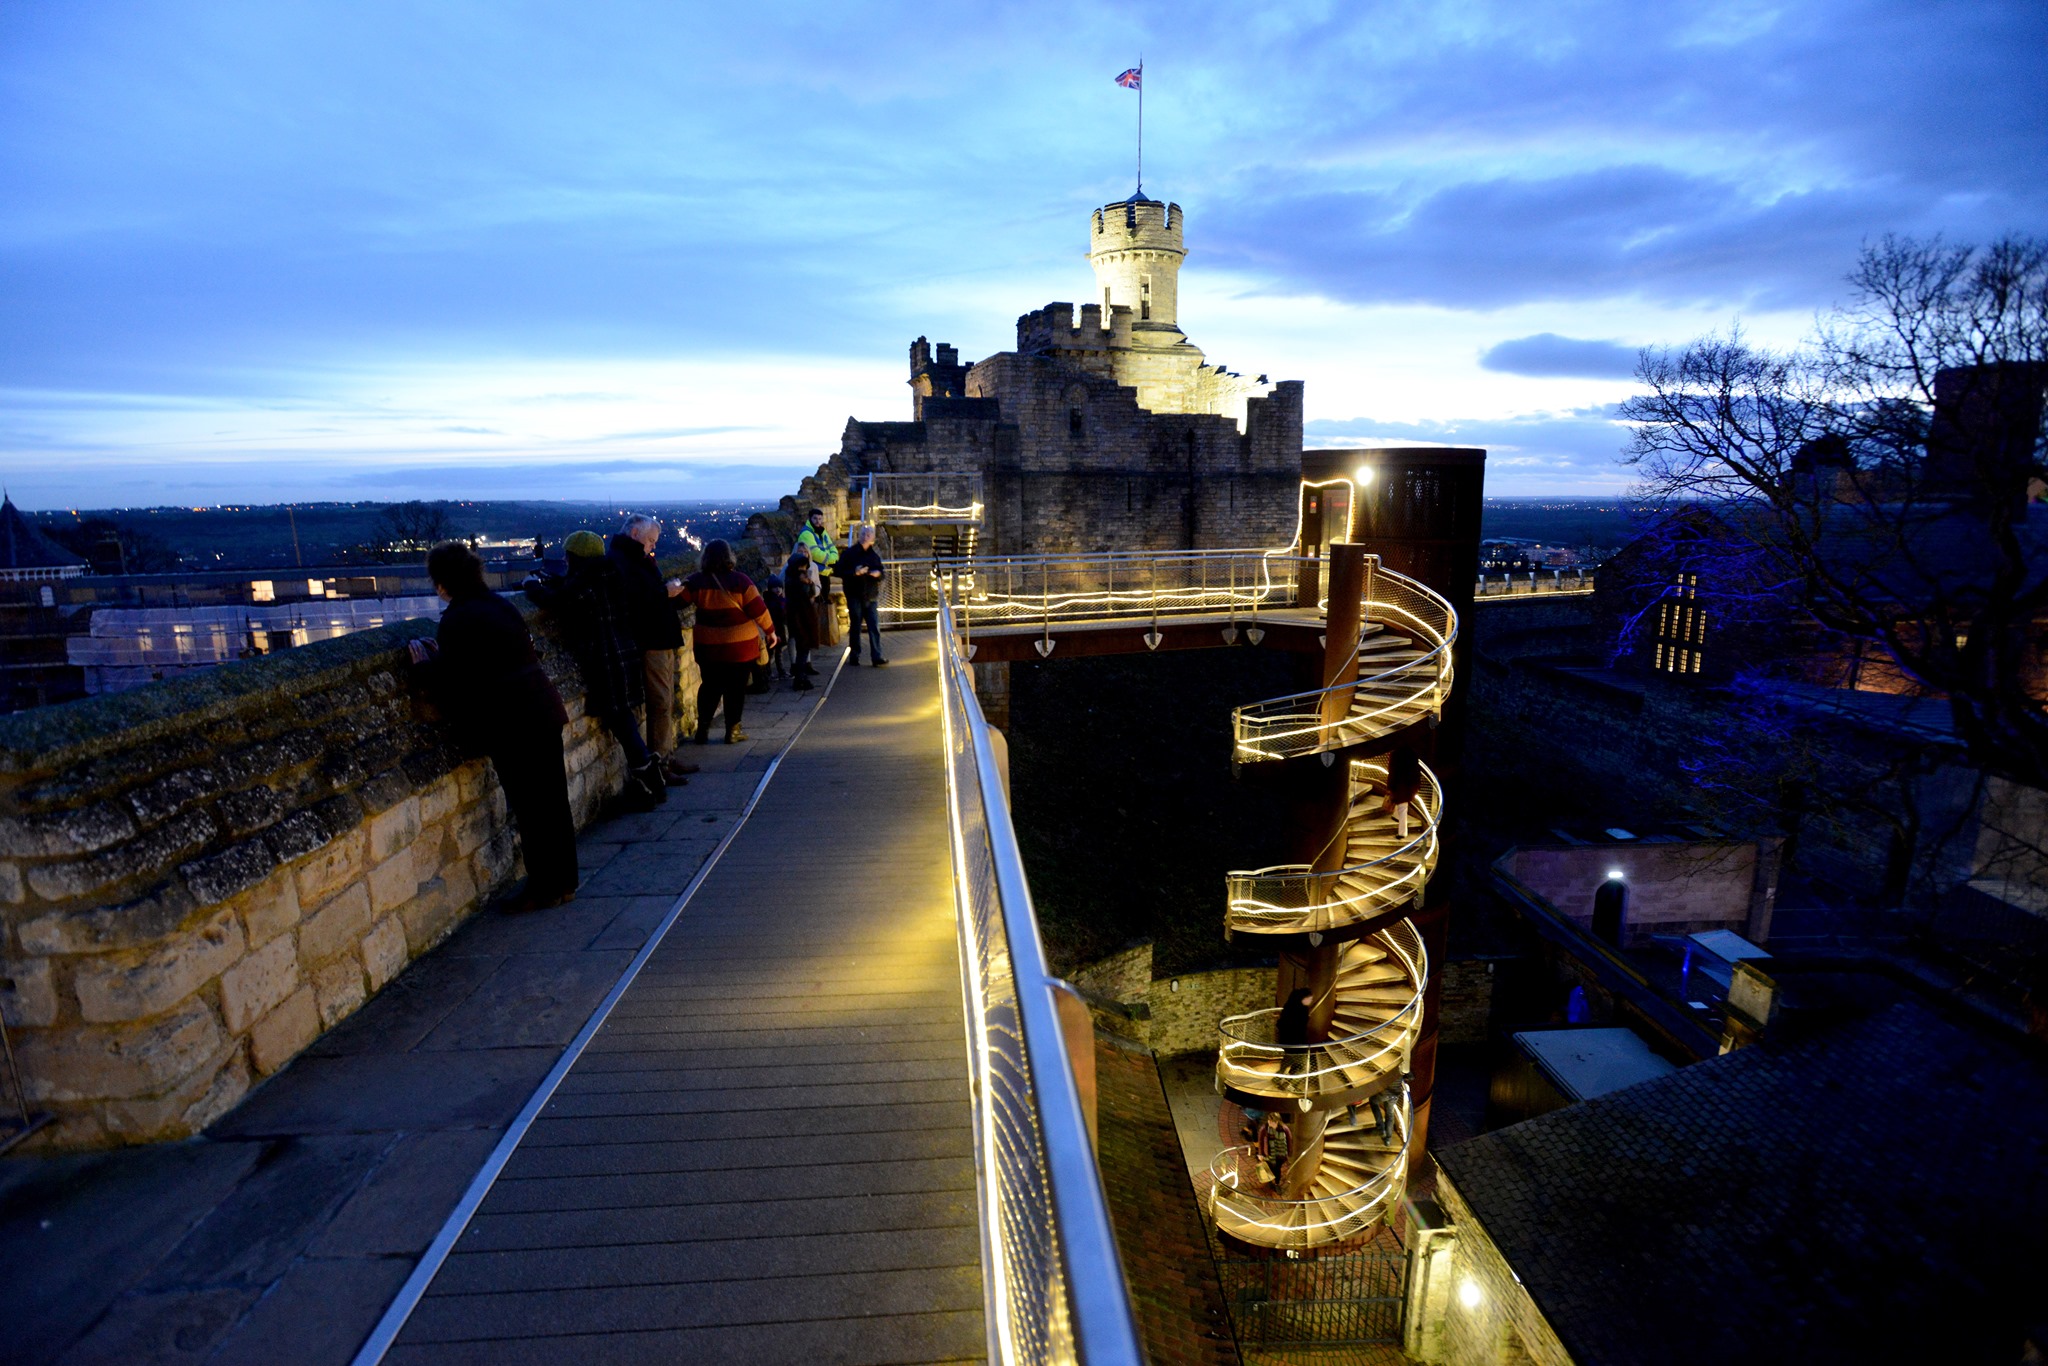 The walls of Lincoln Castle lit up by lights.